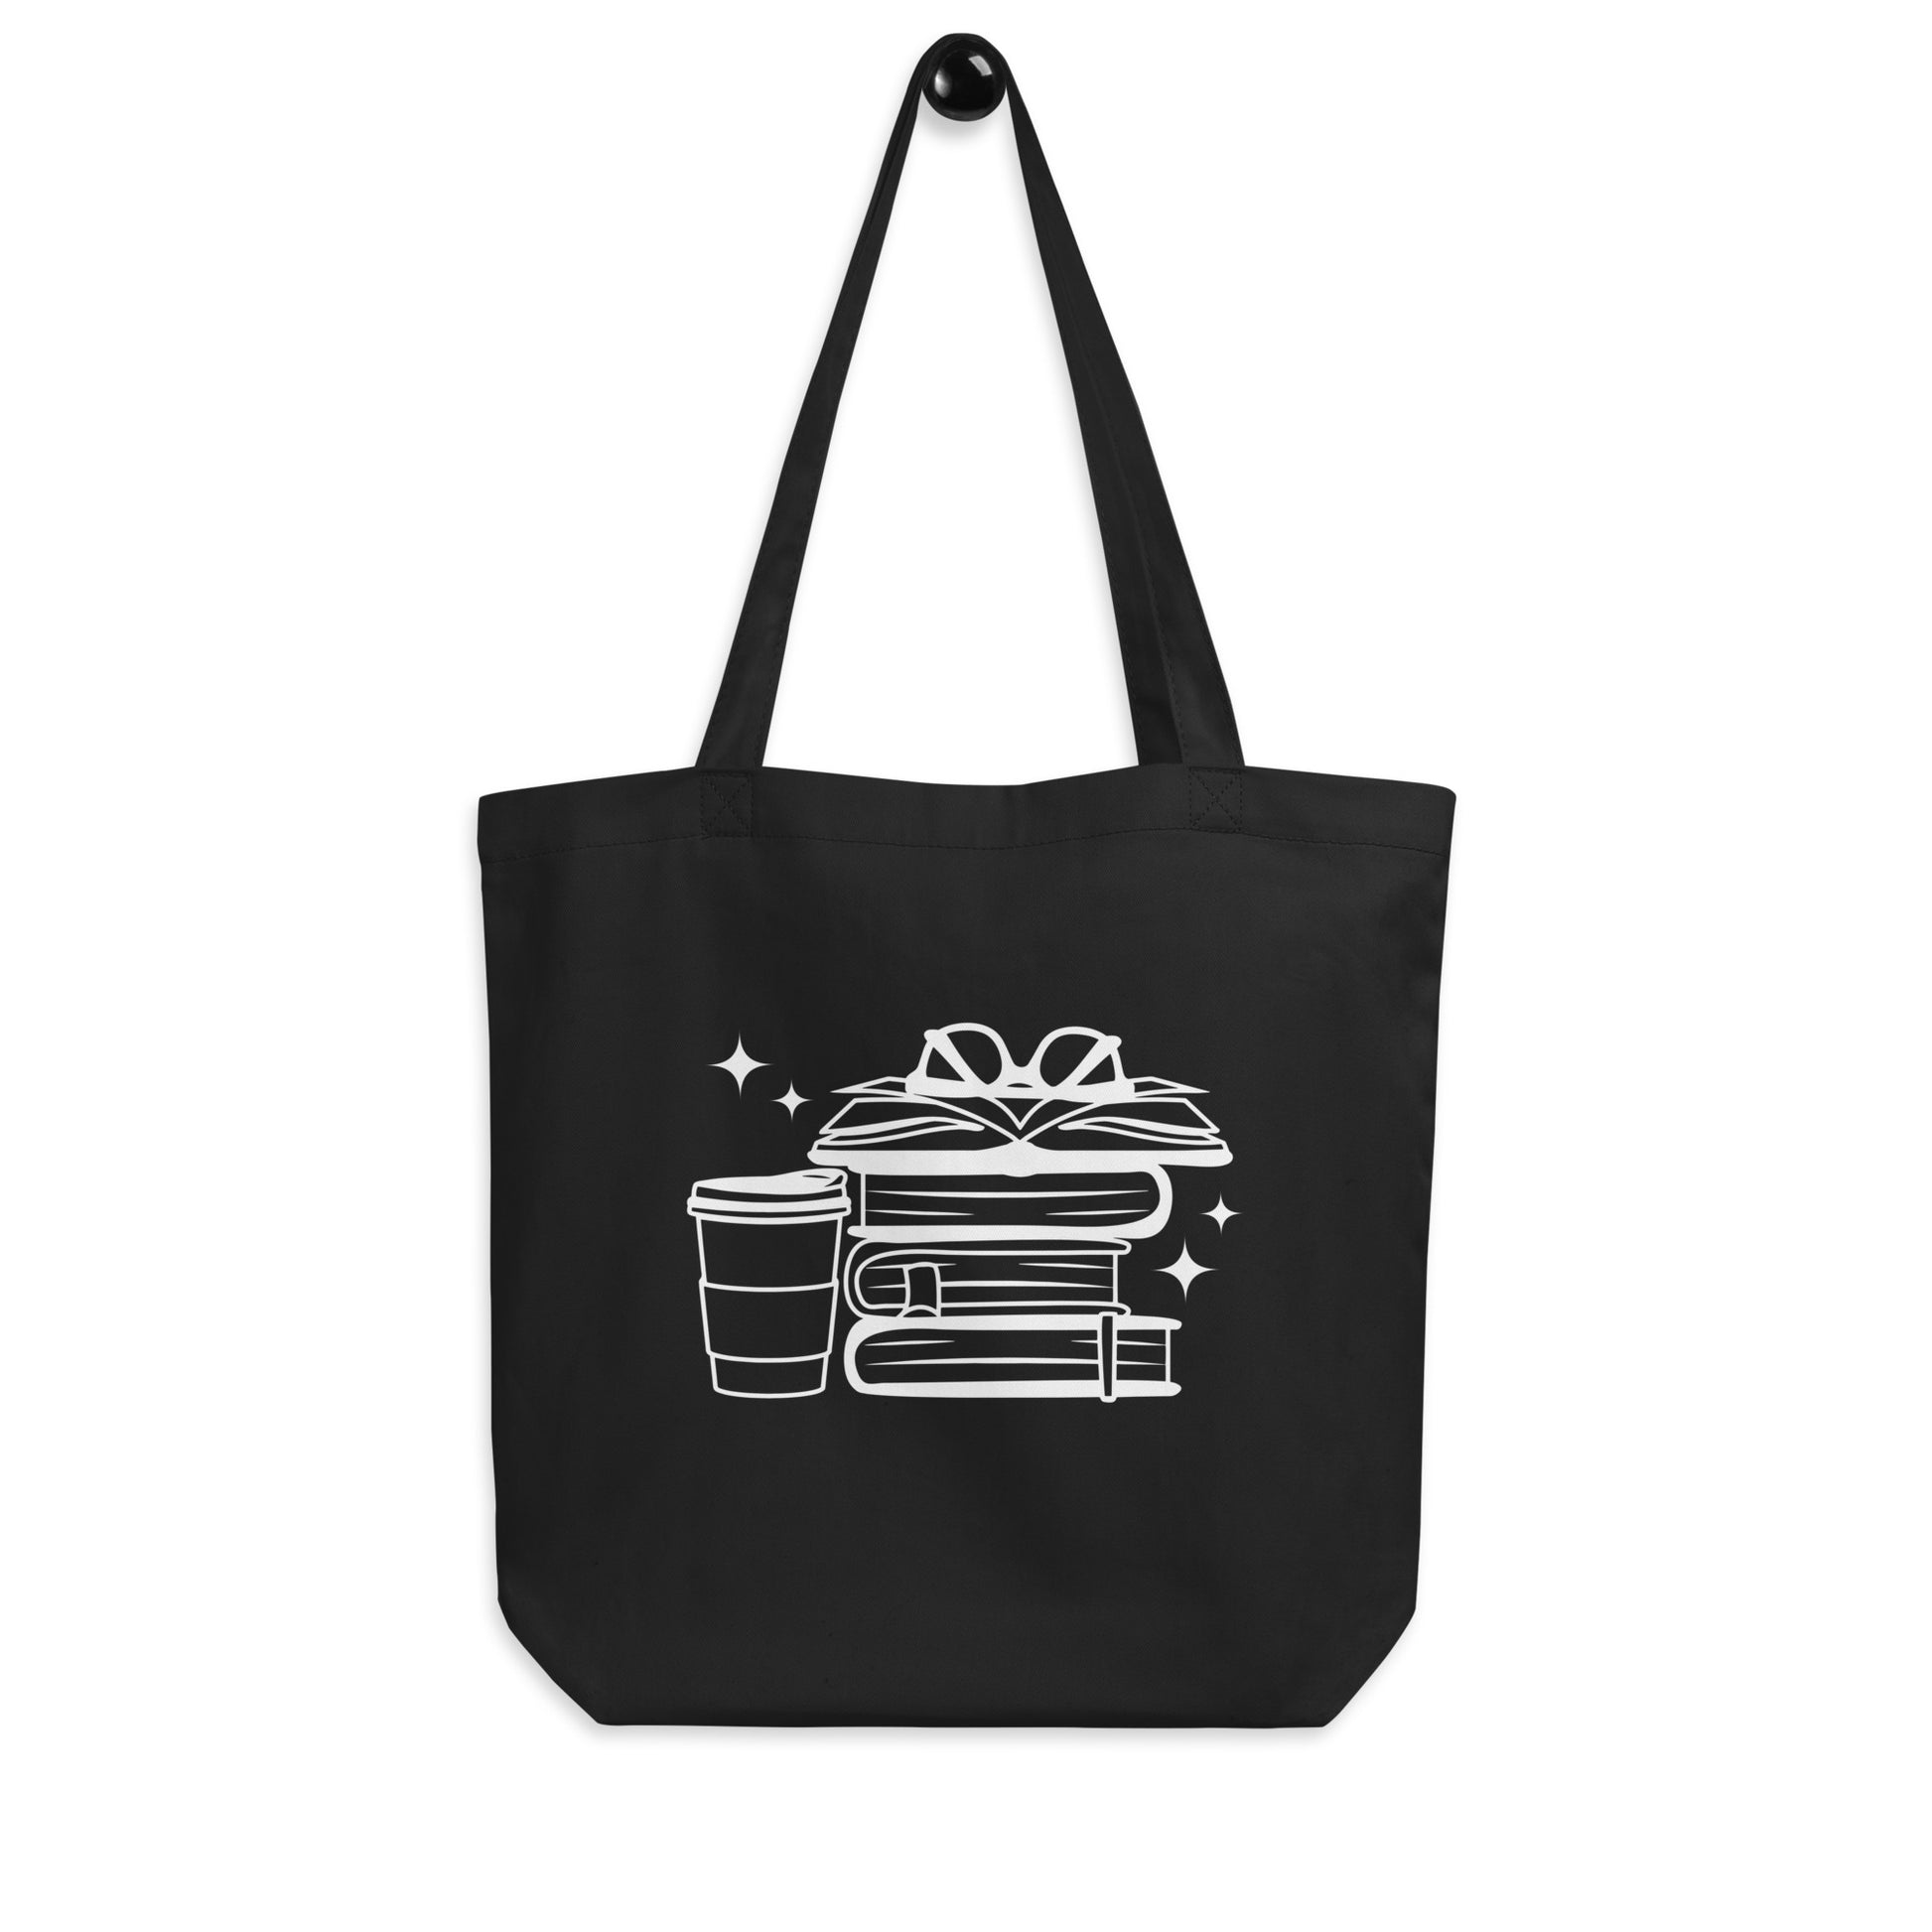 Black cotton tote bag featuring stack of books with glasses on top with coffee cup. Perfect book bag for book lovers